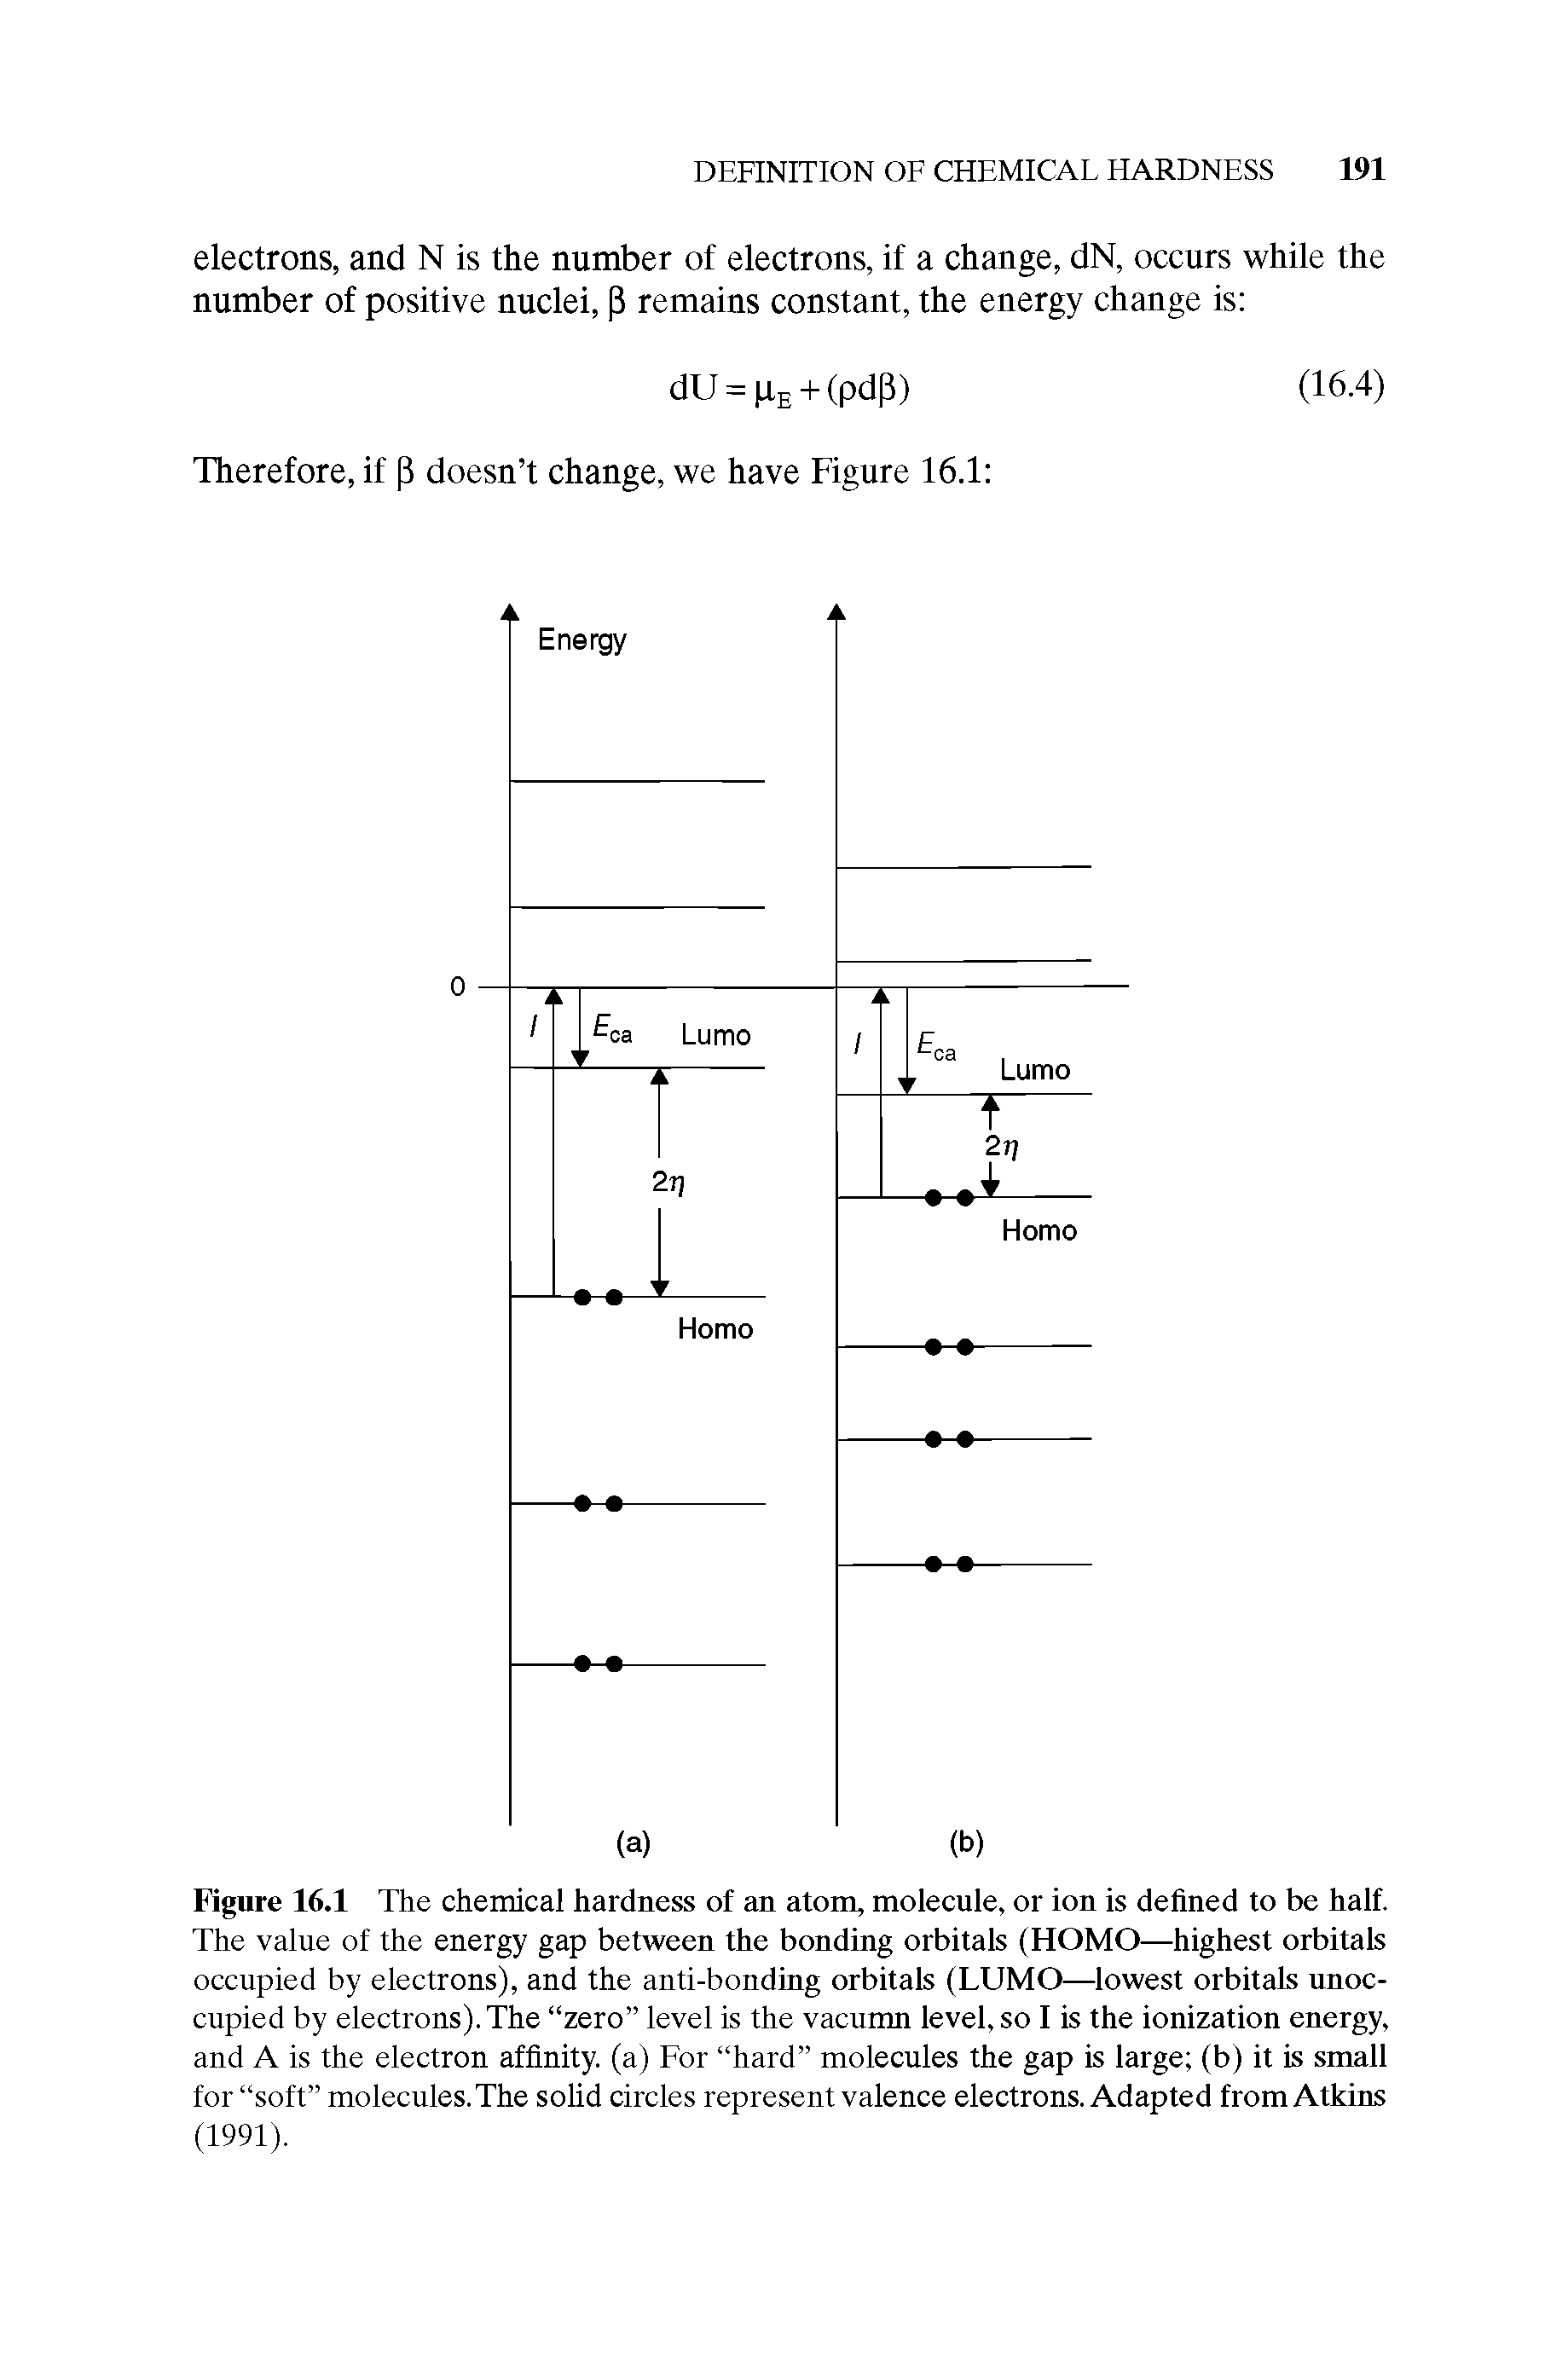 Figure 16.1 The chemical hardness of an atom, molecule, or ion is defined to be half. The value of the energy gap between the bonding orbitals (HOMO—highest orbitals occupied by electrons), and the anti-bonding orbitals (LUMO—lowest orbitals unoccupied by electrons). The zero level is the vacumn level, so I is the ionization energy, and A is the electron affinity, (a) For hard molecules the gap is large (b) it is small for soft molecules. The solid circles represent valence electrons. Adapted from Atkins (1991).